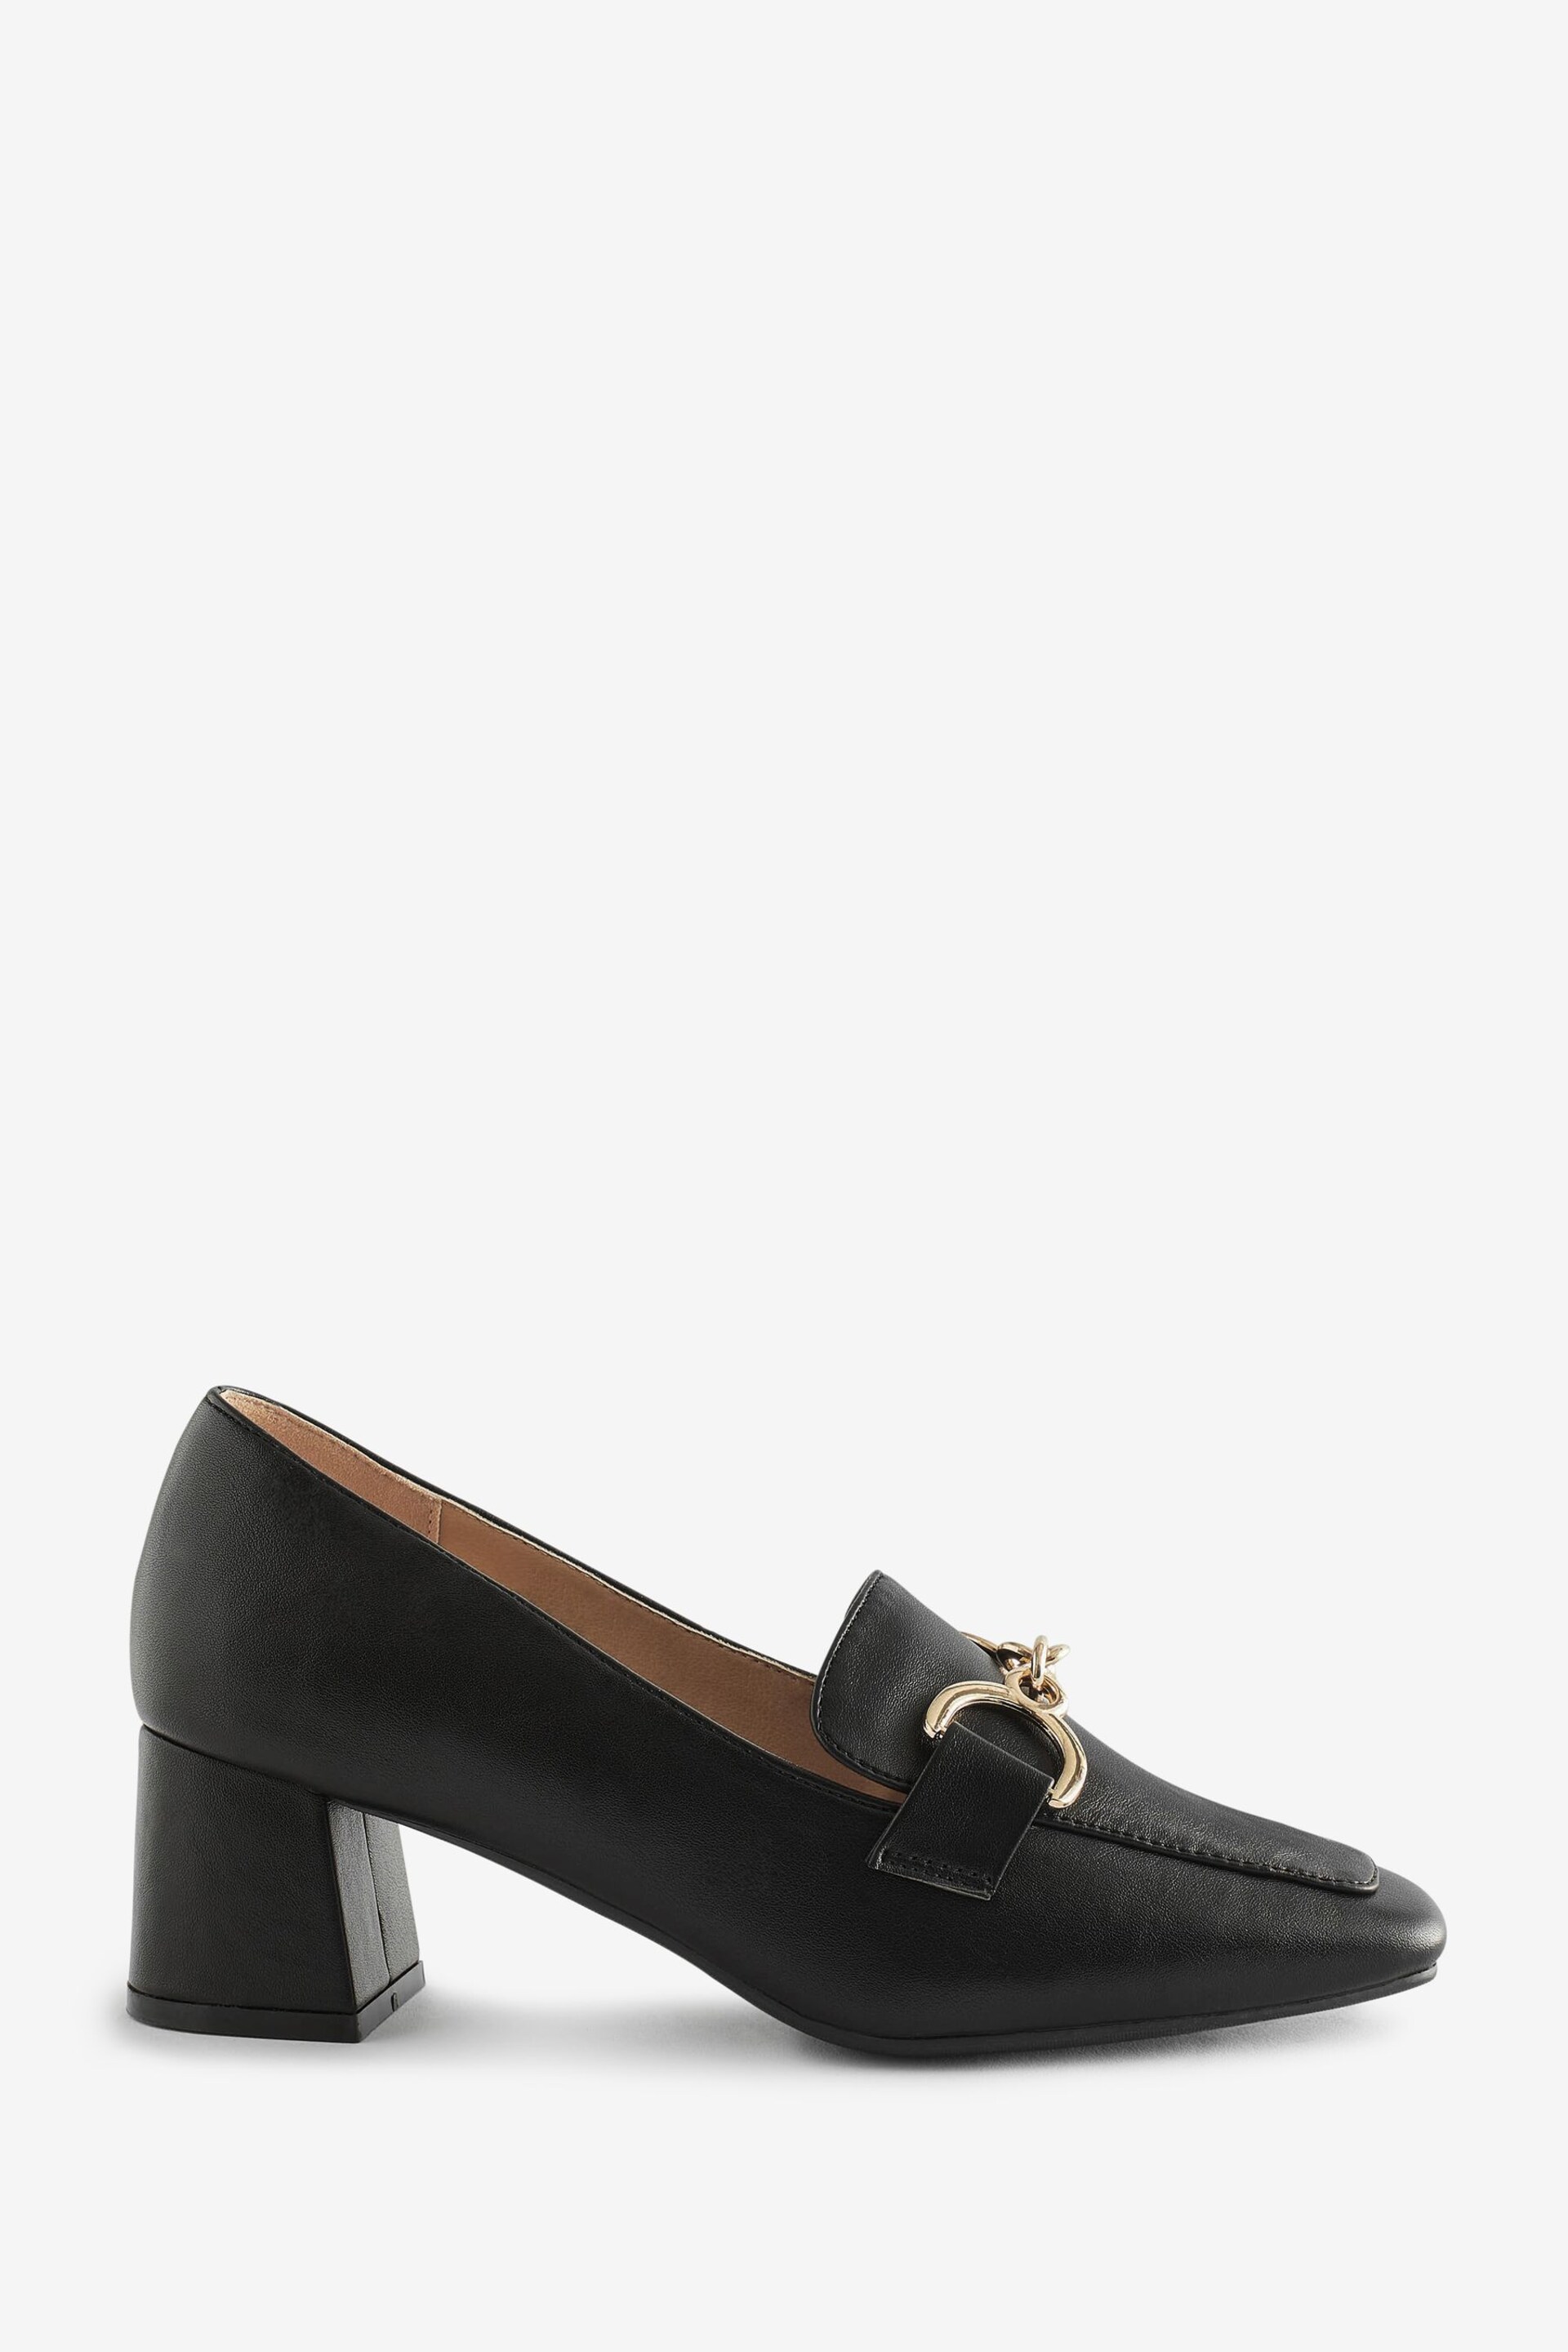 JD Williams Black Flexible Block Heel Loafers With Trim In Extra Wide Fit - Image 2 of 3